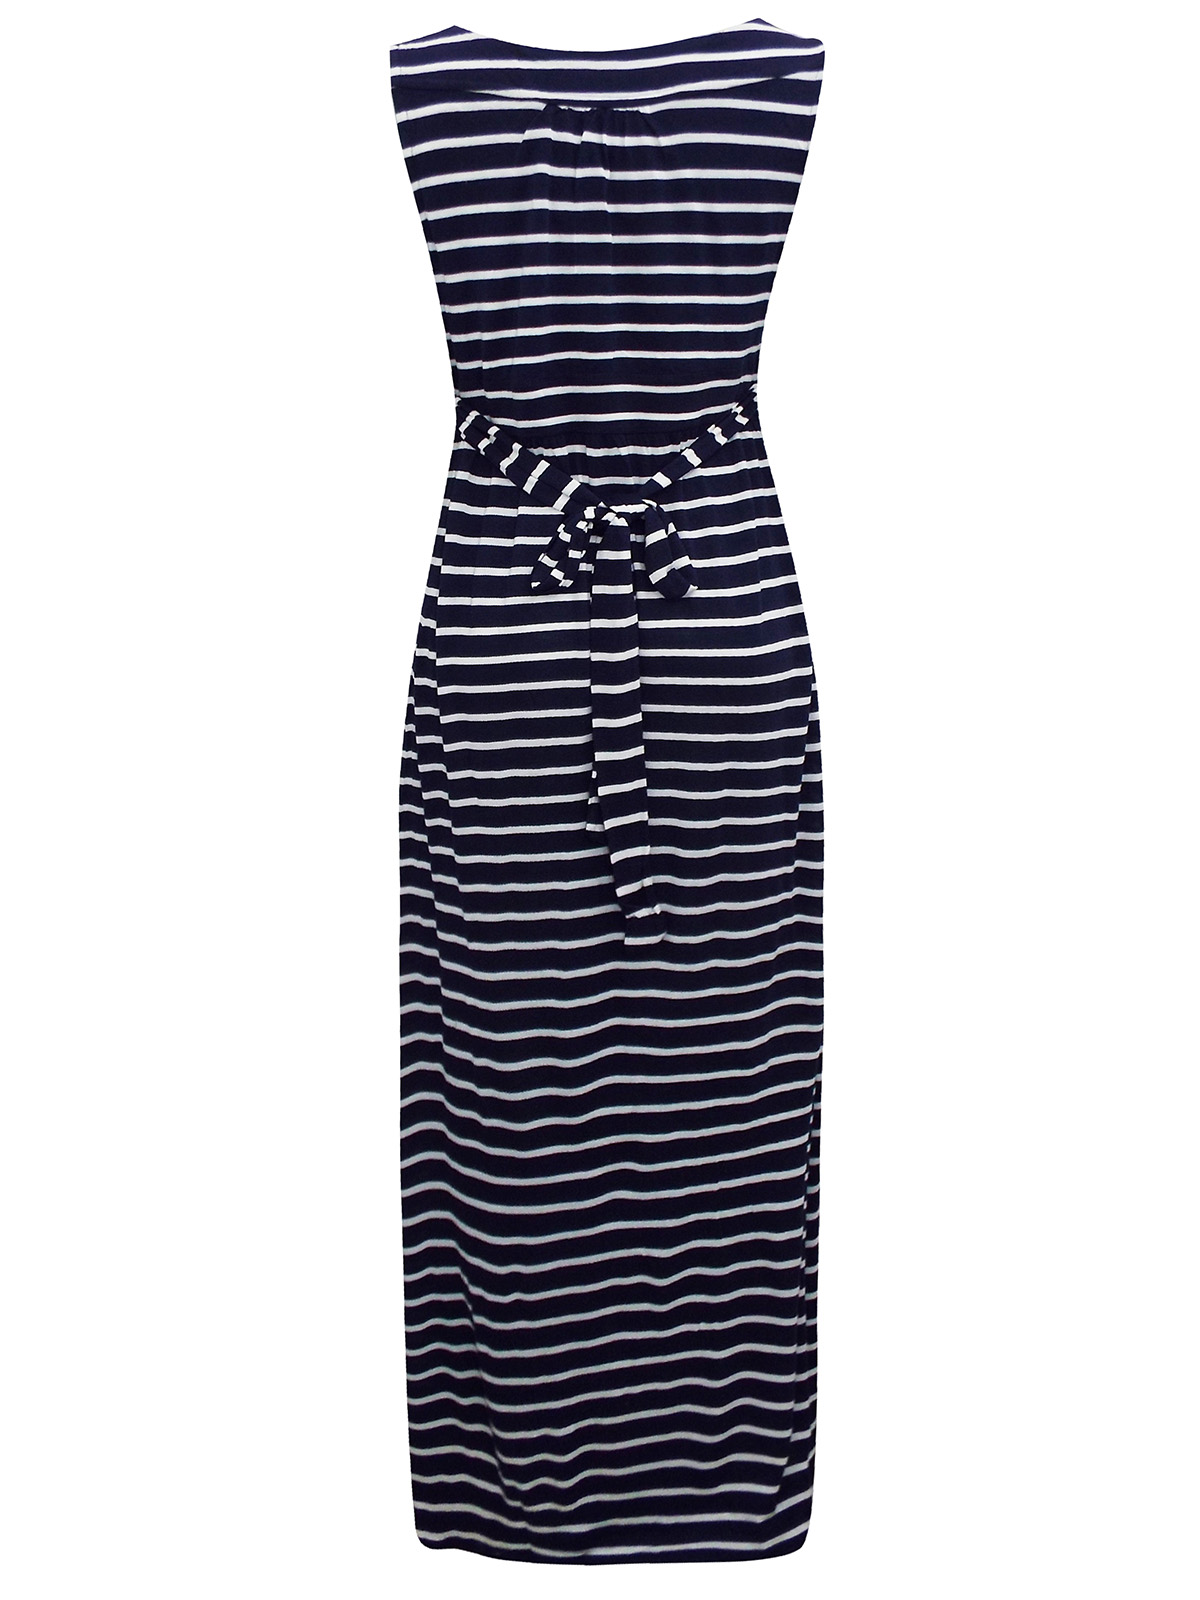 FAT FACE - - Fat Face NAVY Striped Jersey Maxi Dress - Size 10 to 14